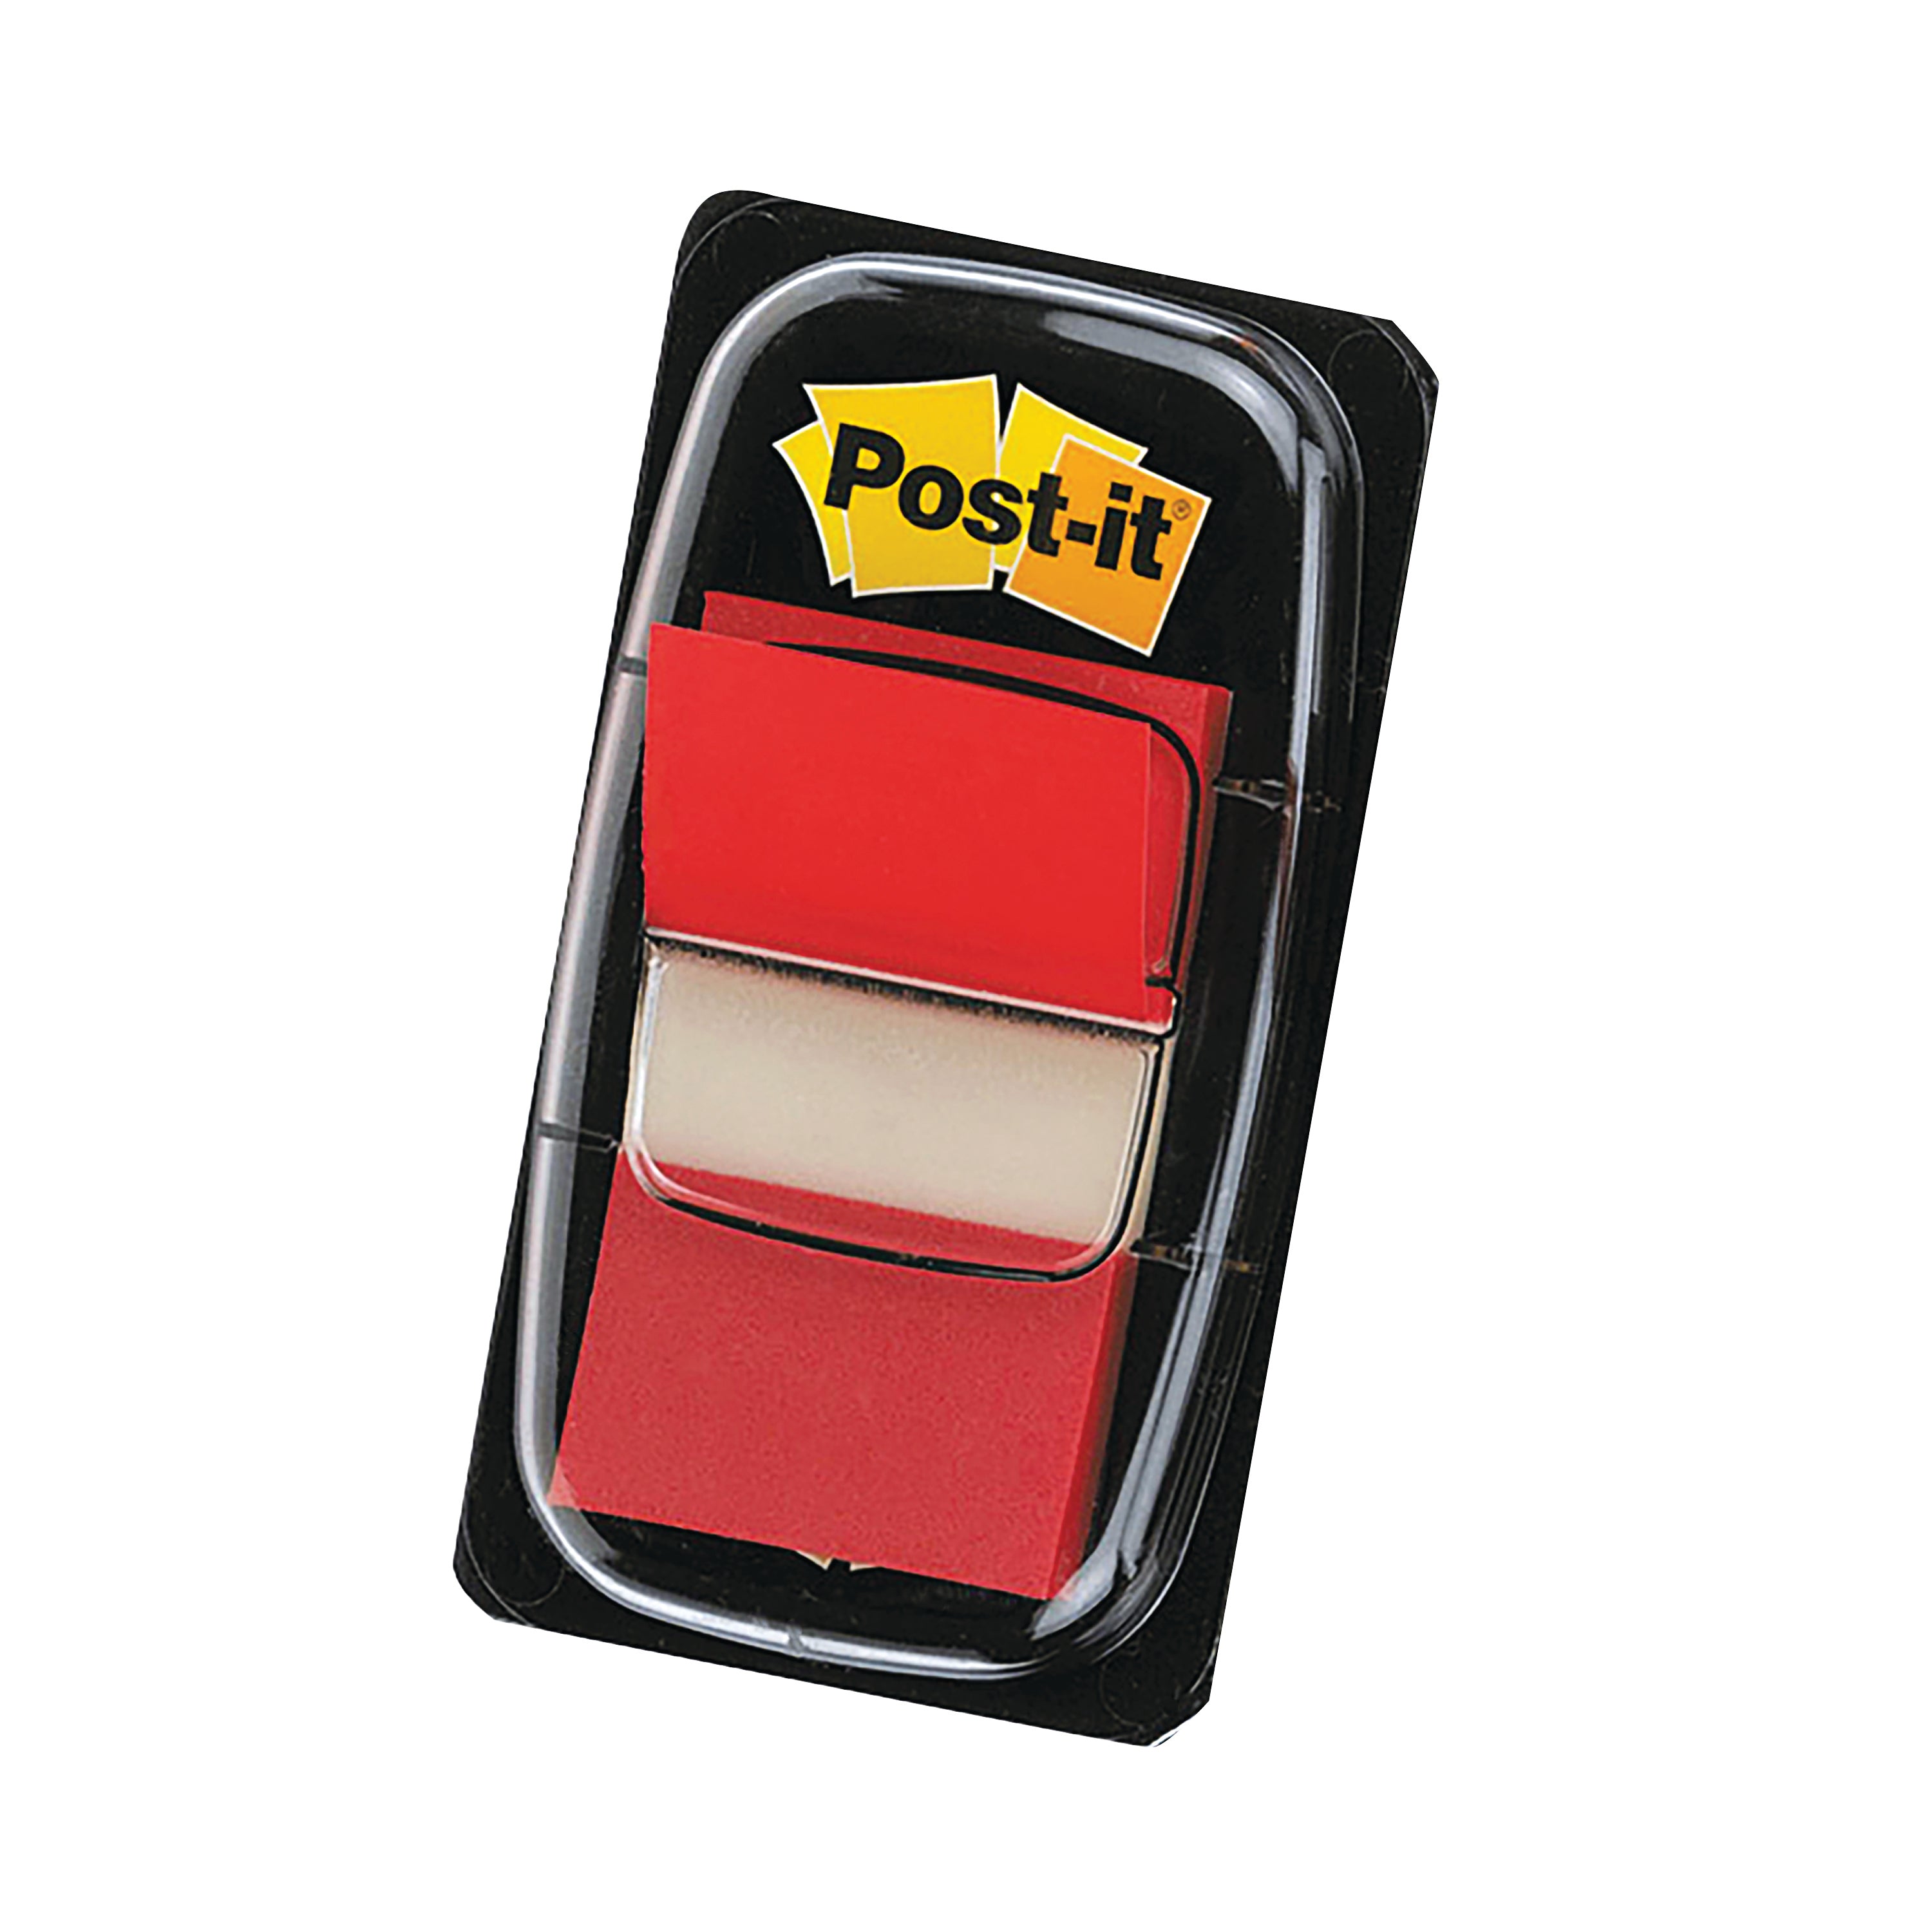 3M Post-it Index Tab 25mm Red with Dispenser 680-1